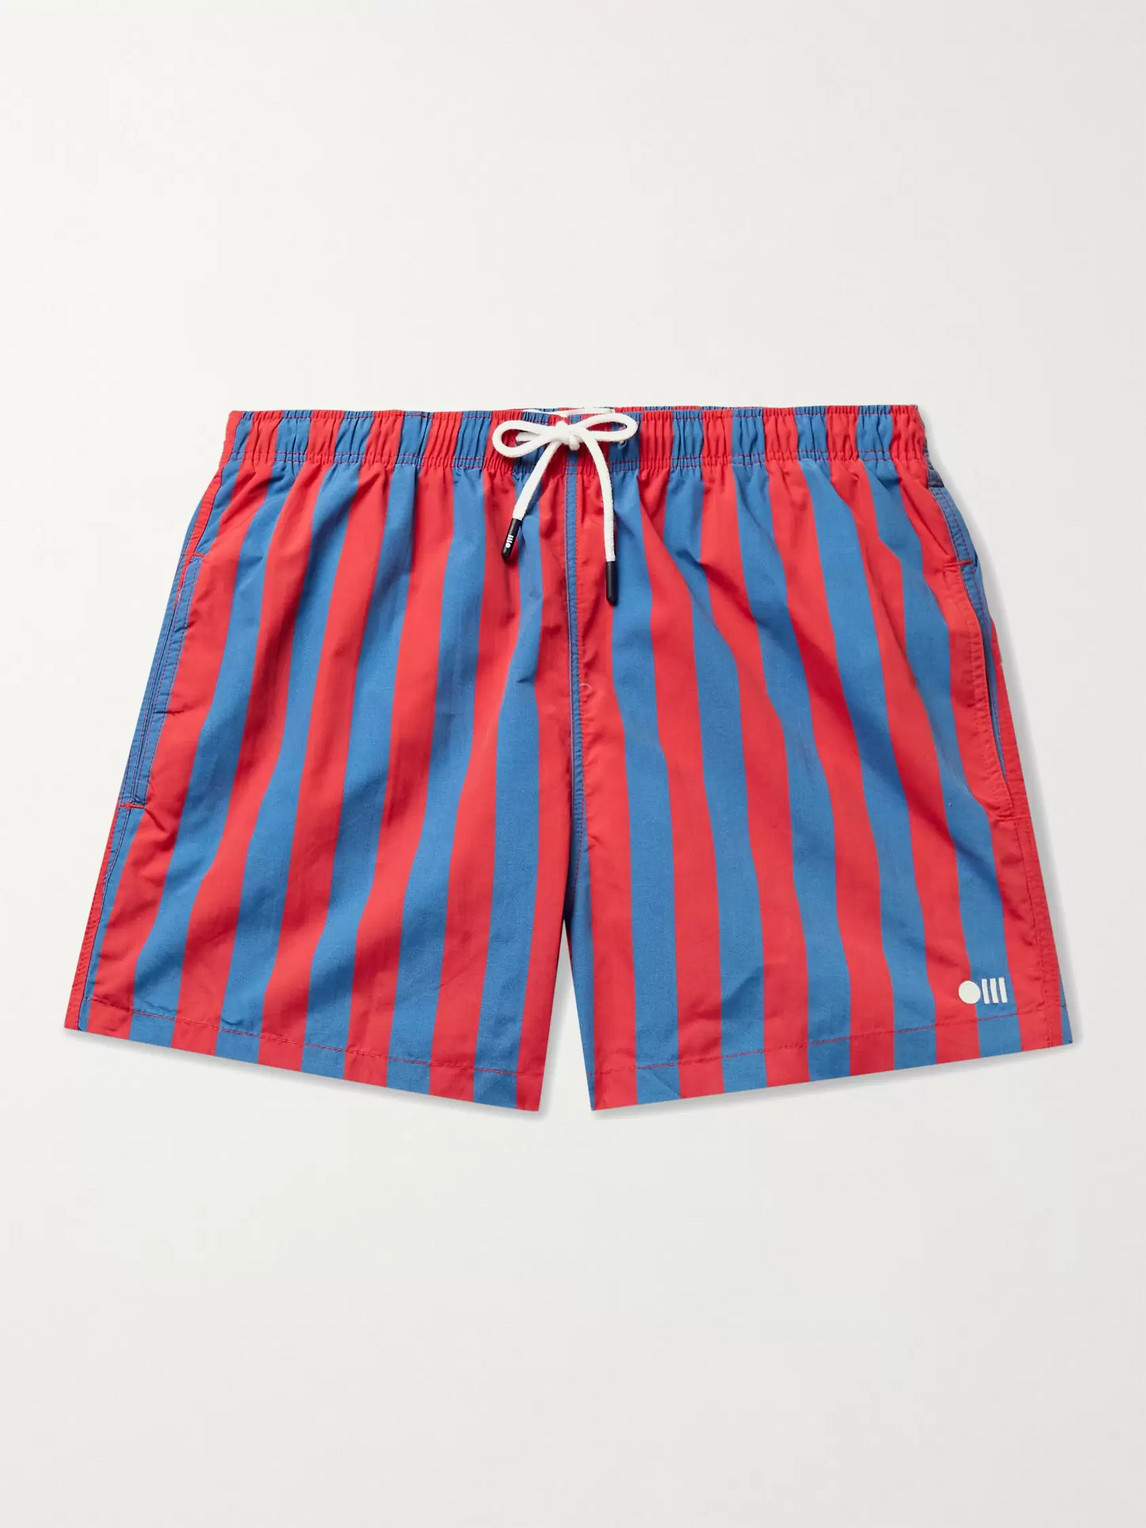 SOLID & STRIPED THE CLASSIC MID-LENGTH STRIPED SWIM SHORTS